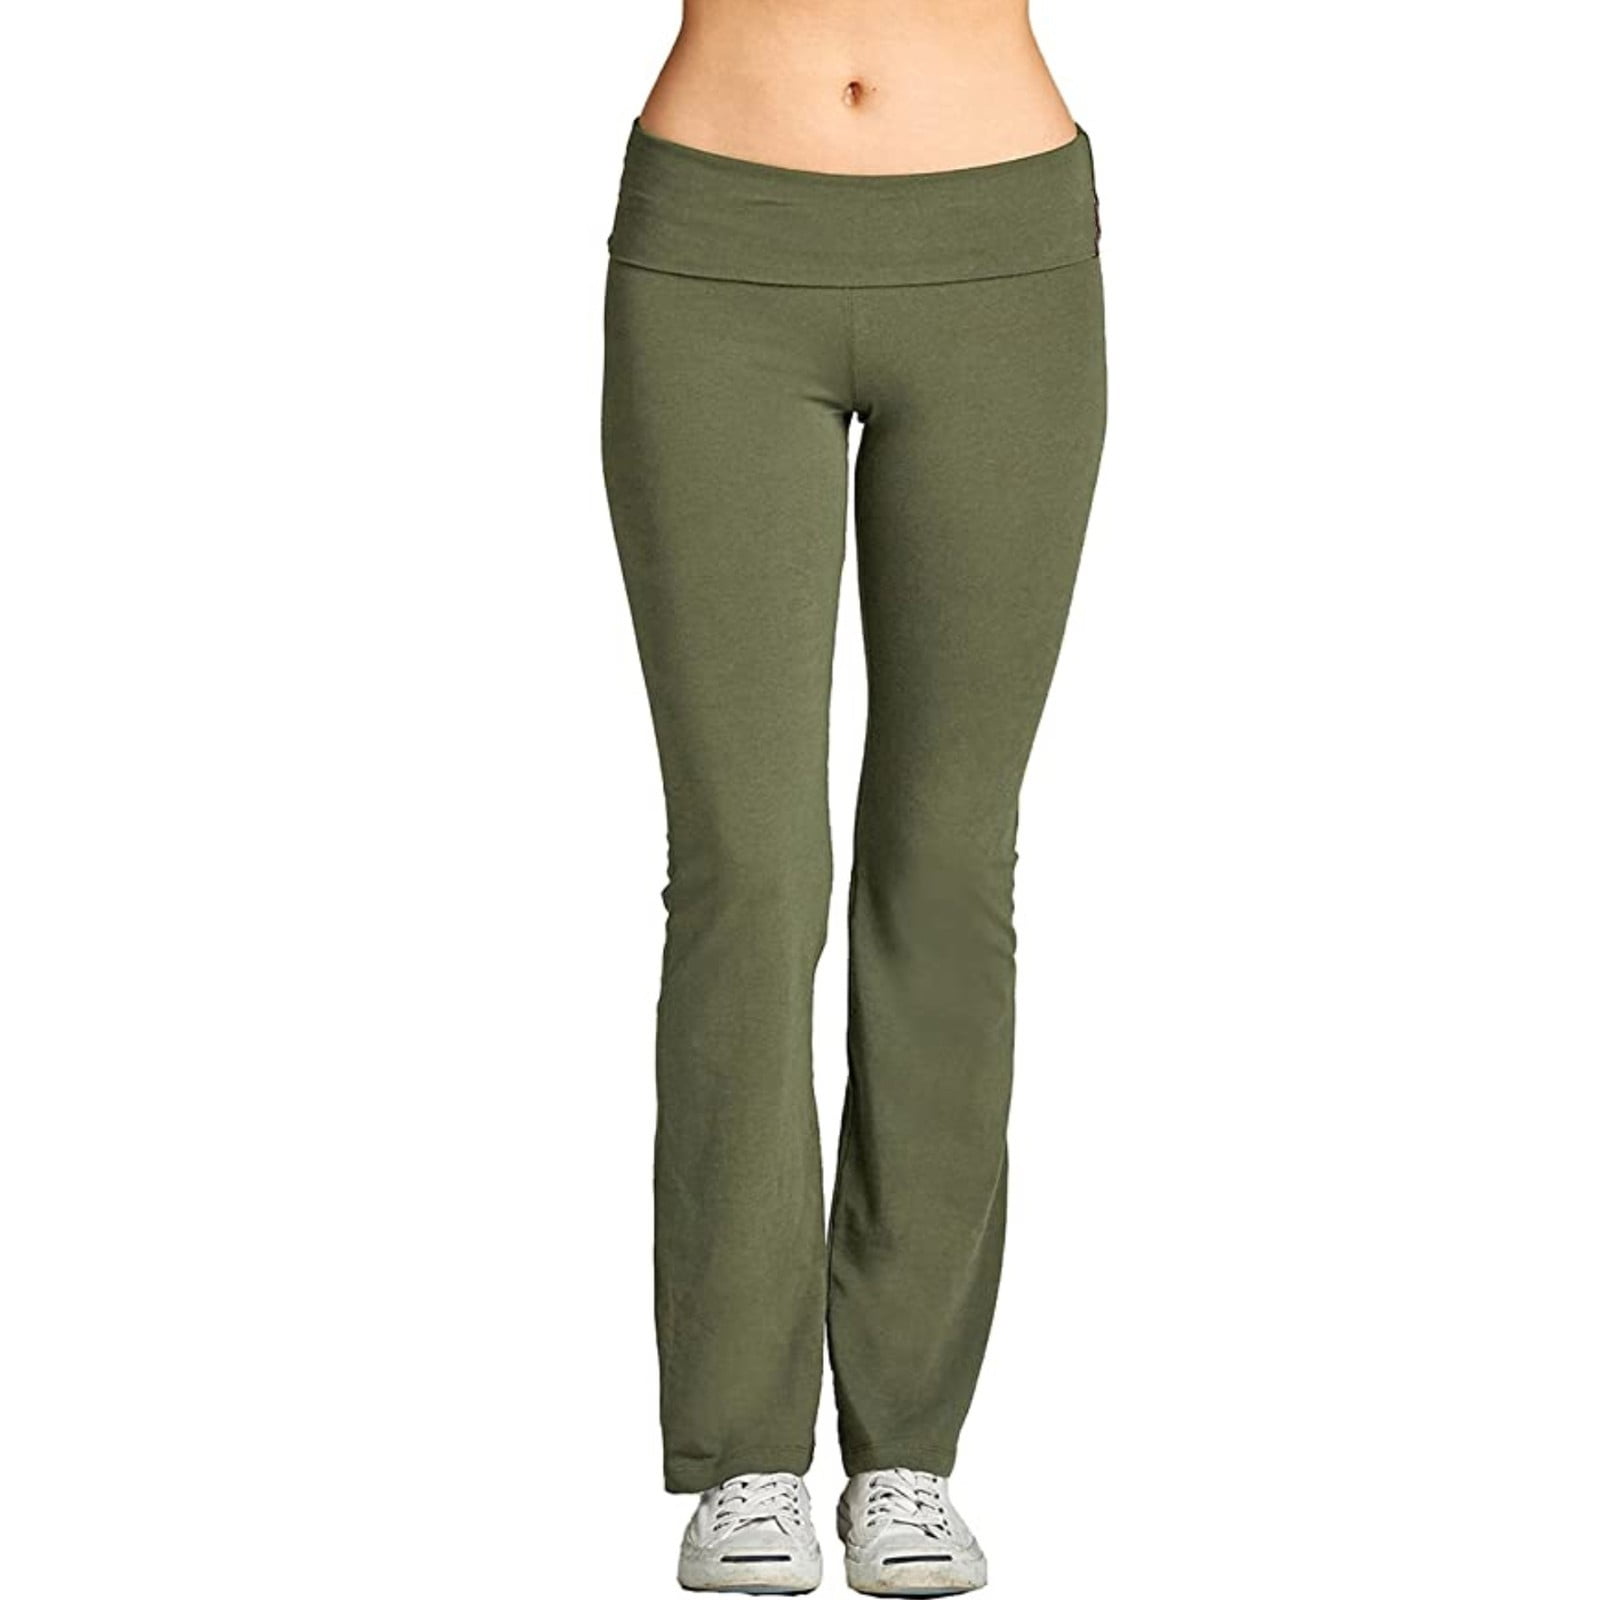 Casual Boot Cut Yoga Flared Pants for Women Lady High Waisted Workout  Jogging Lounge Sweat Pants Plus Size Gym Stretch Activewear Leggings